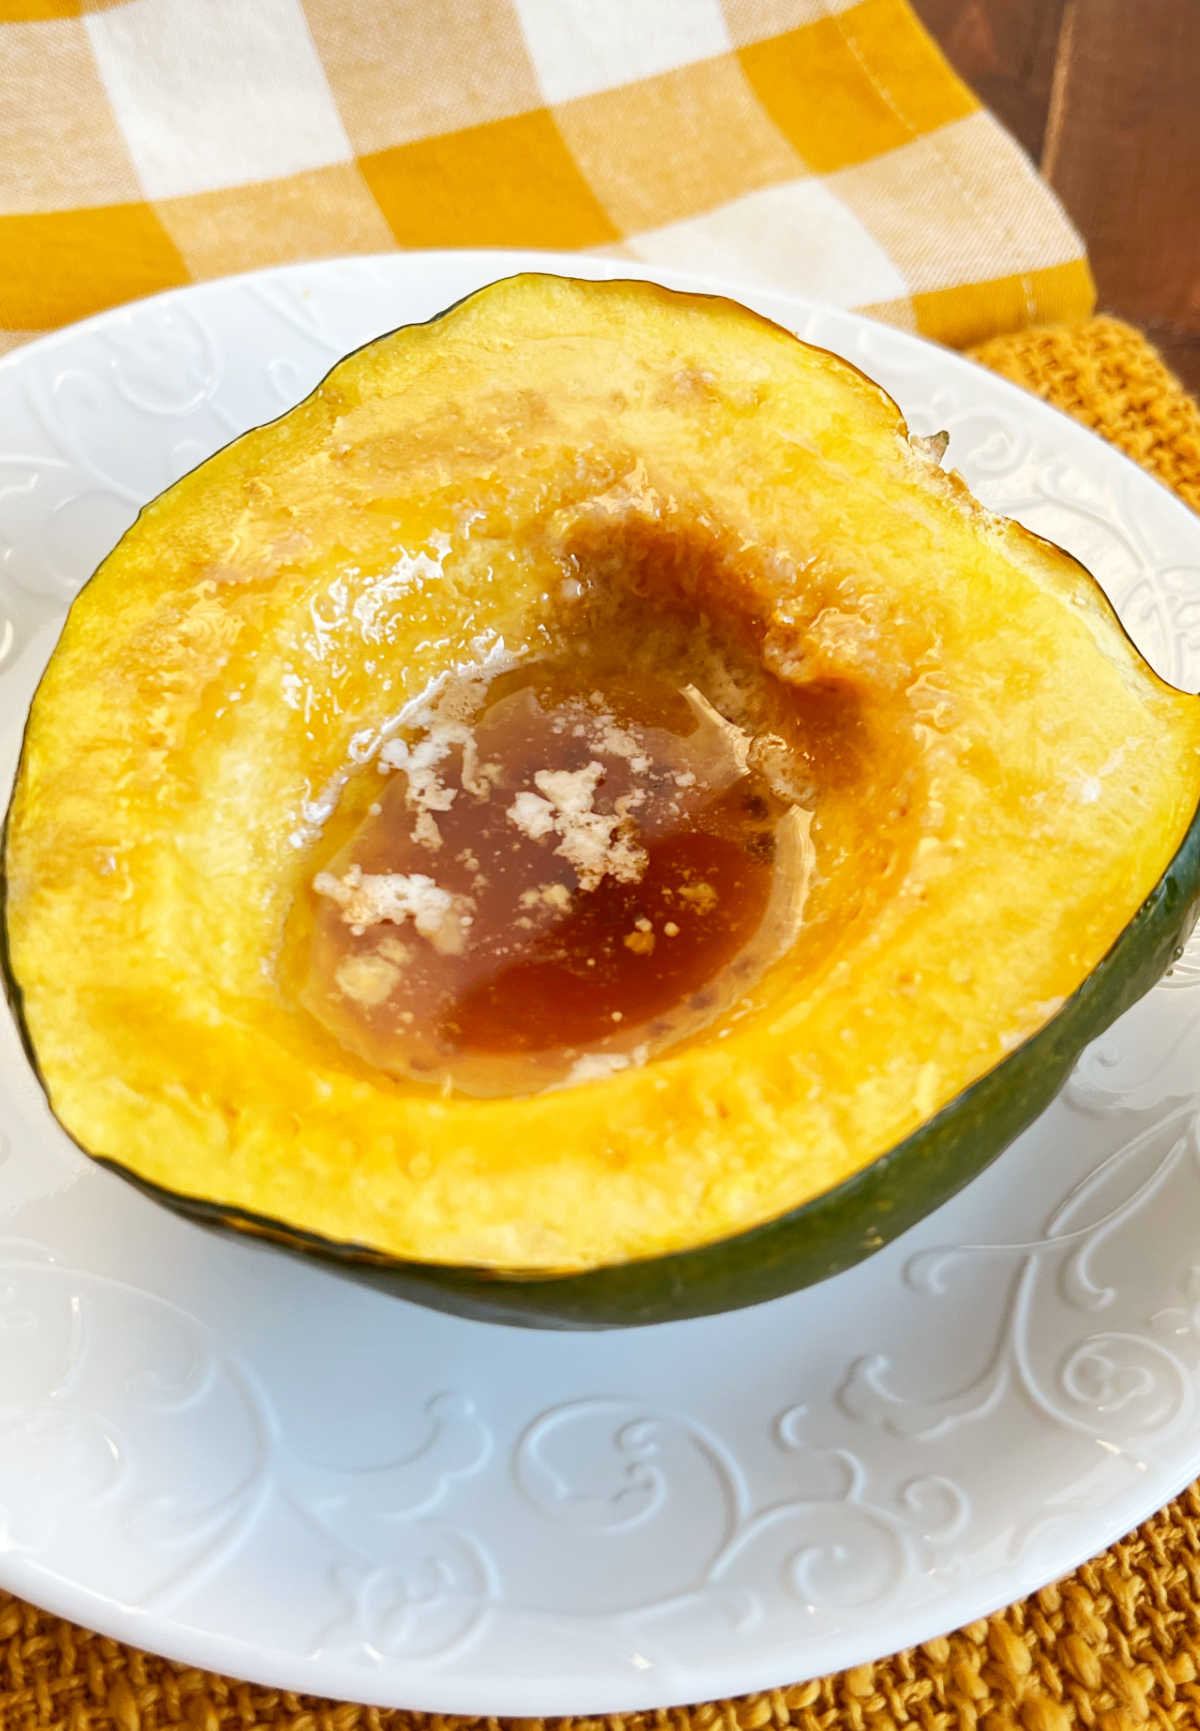 microwaved acorn squash half with melted butter brown sugar center.